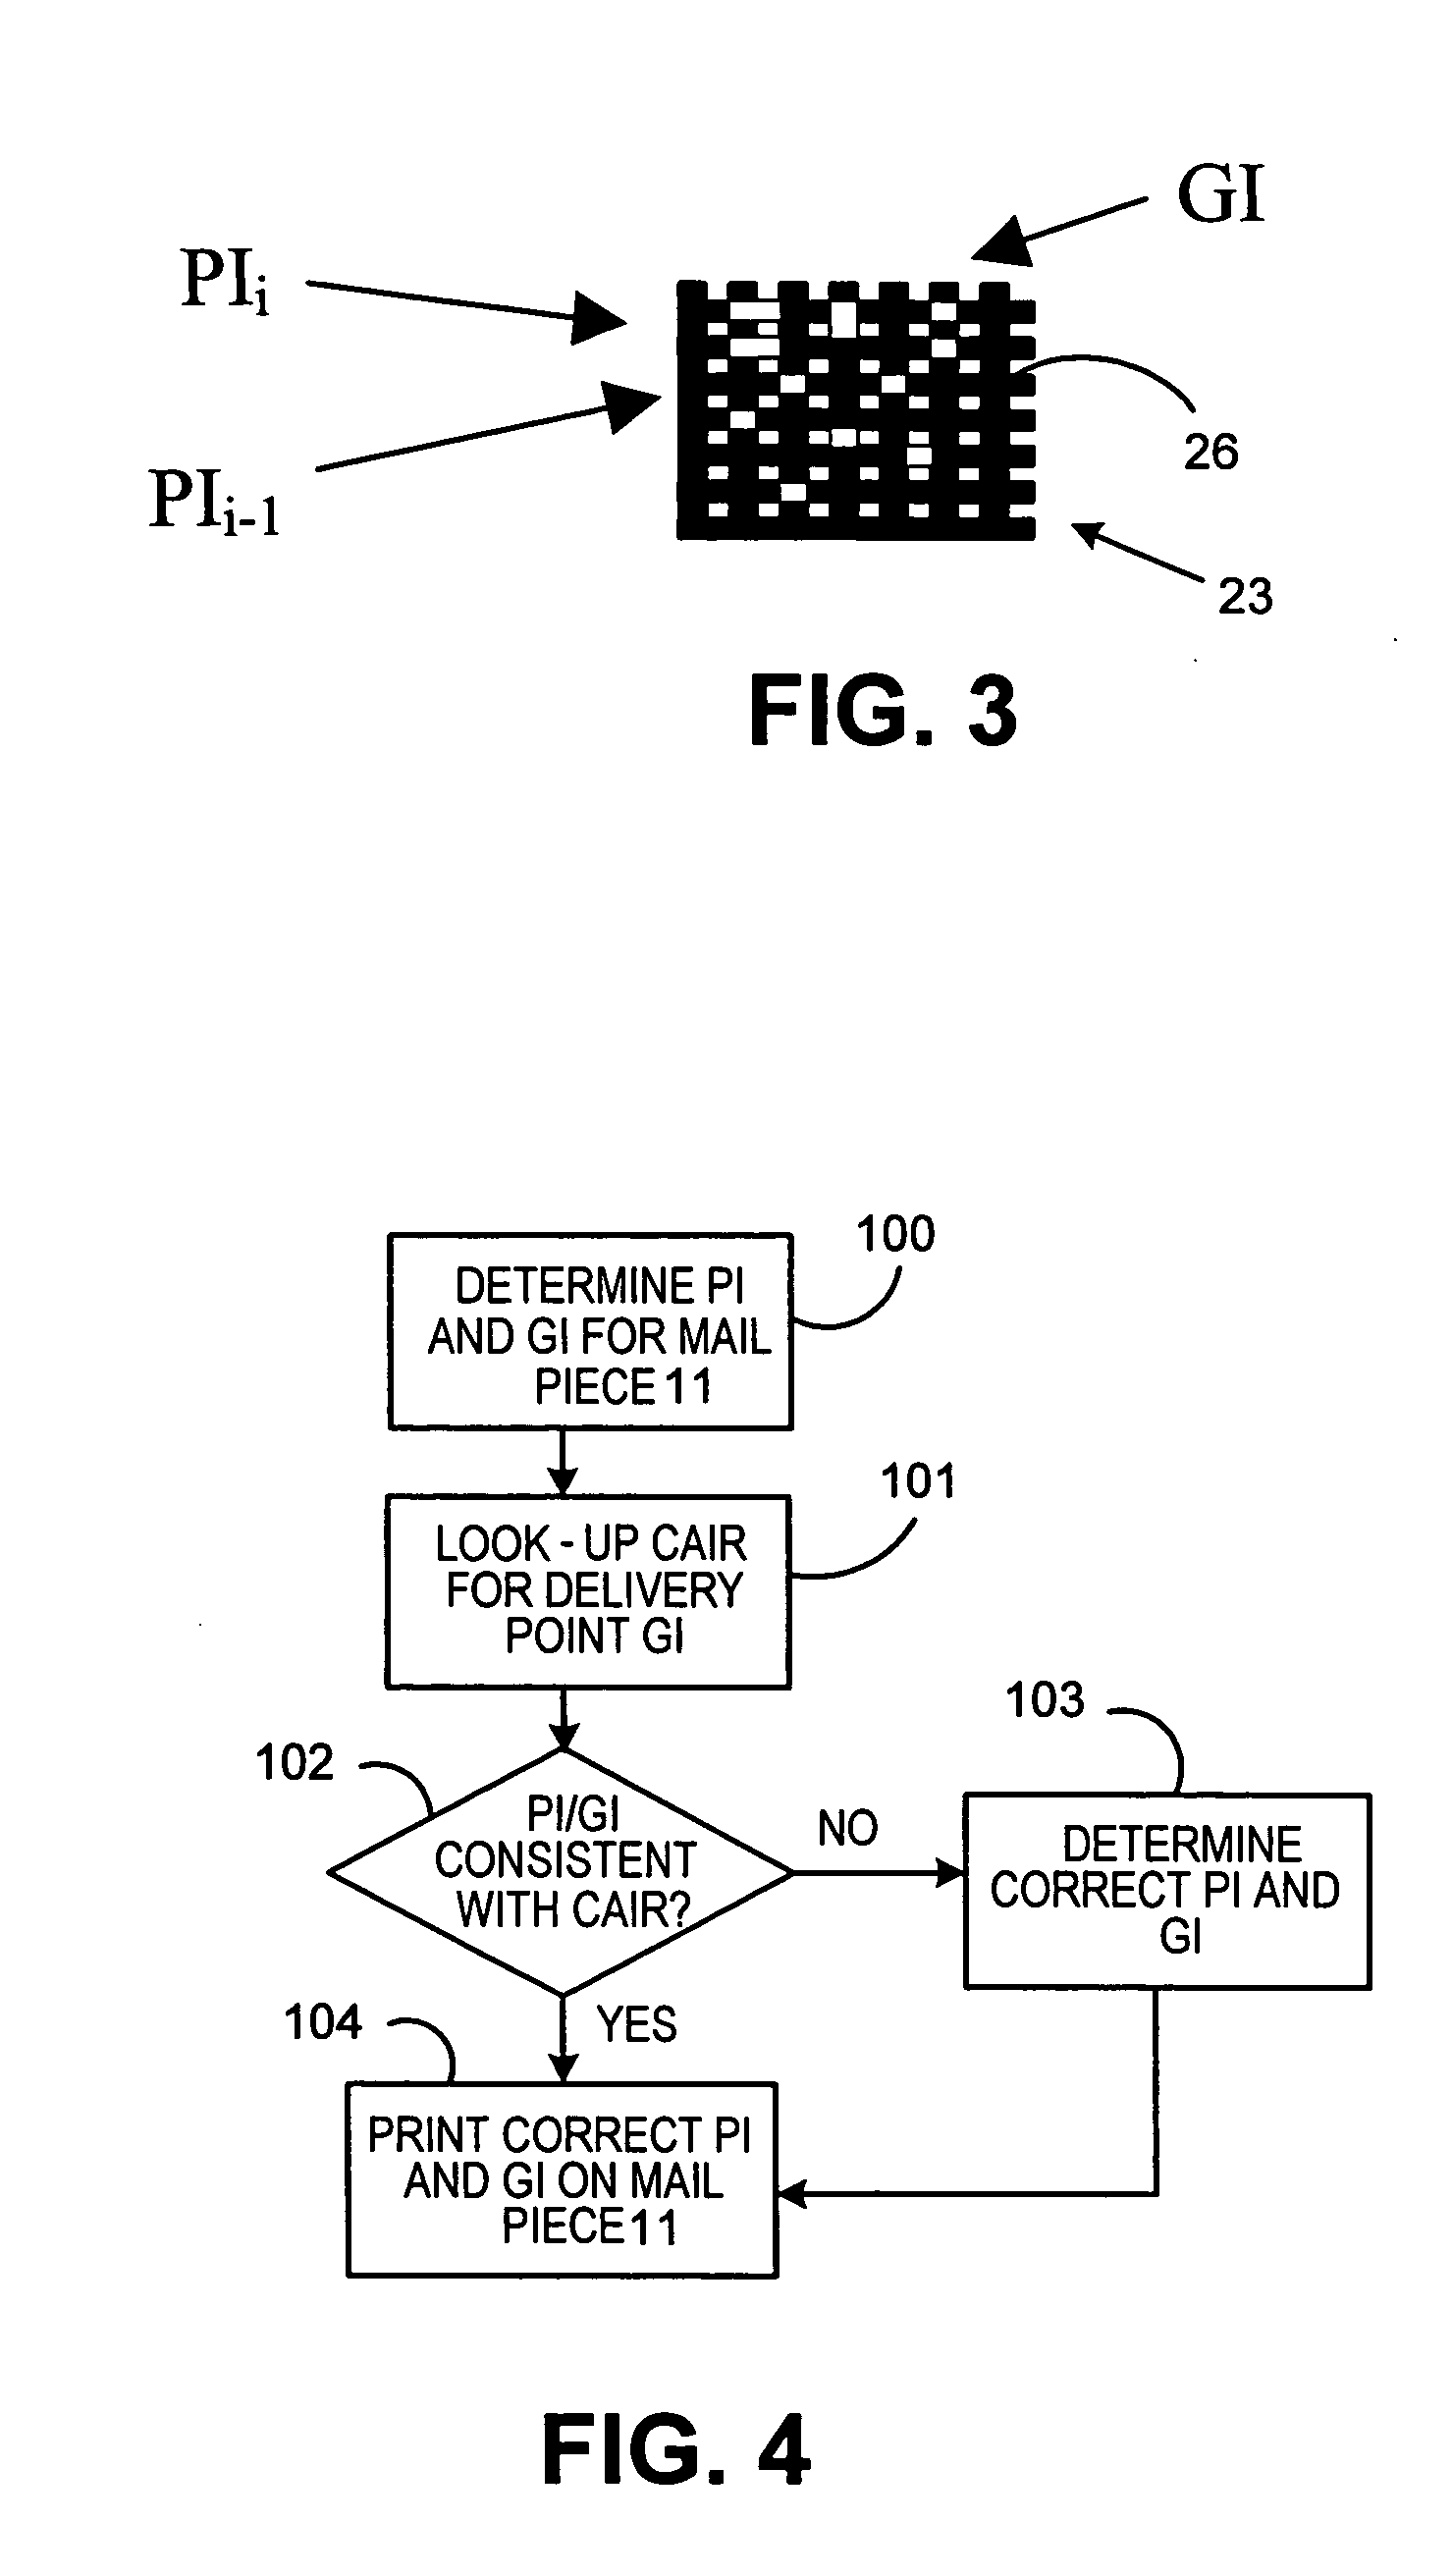 System and method for automated mailing address error detection and correction